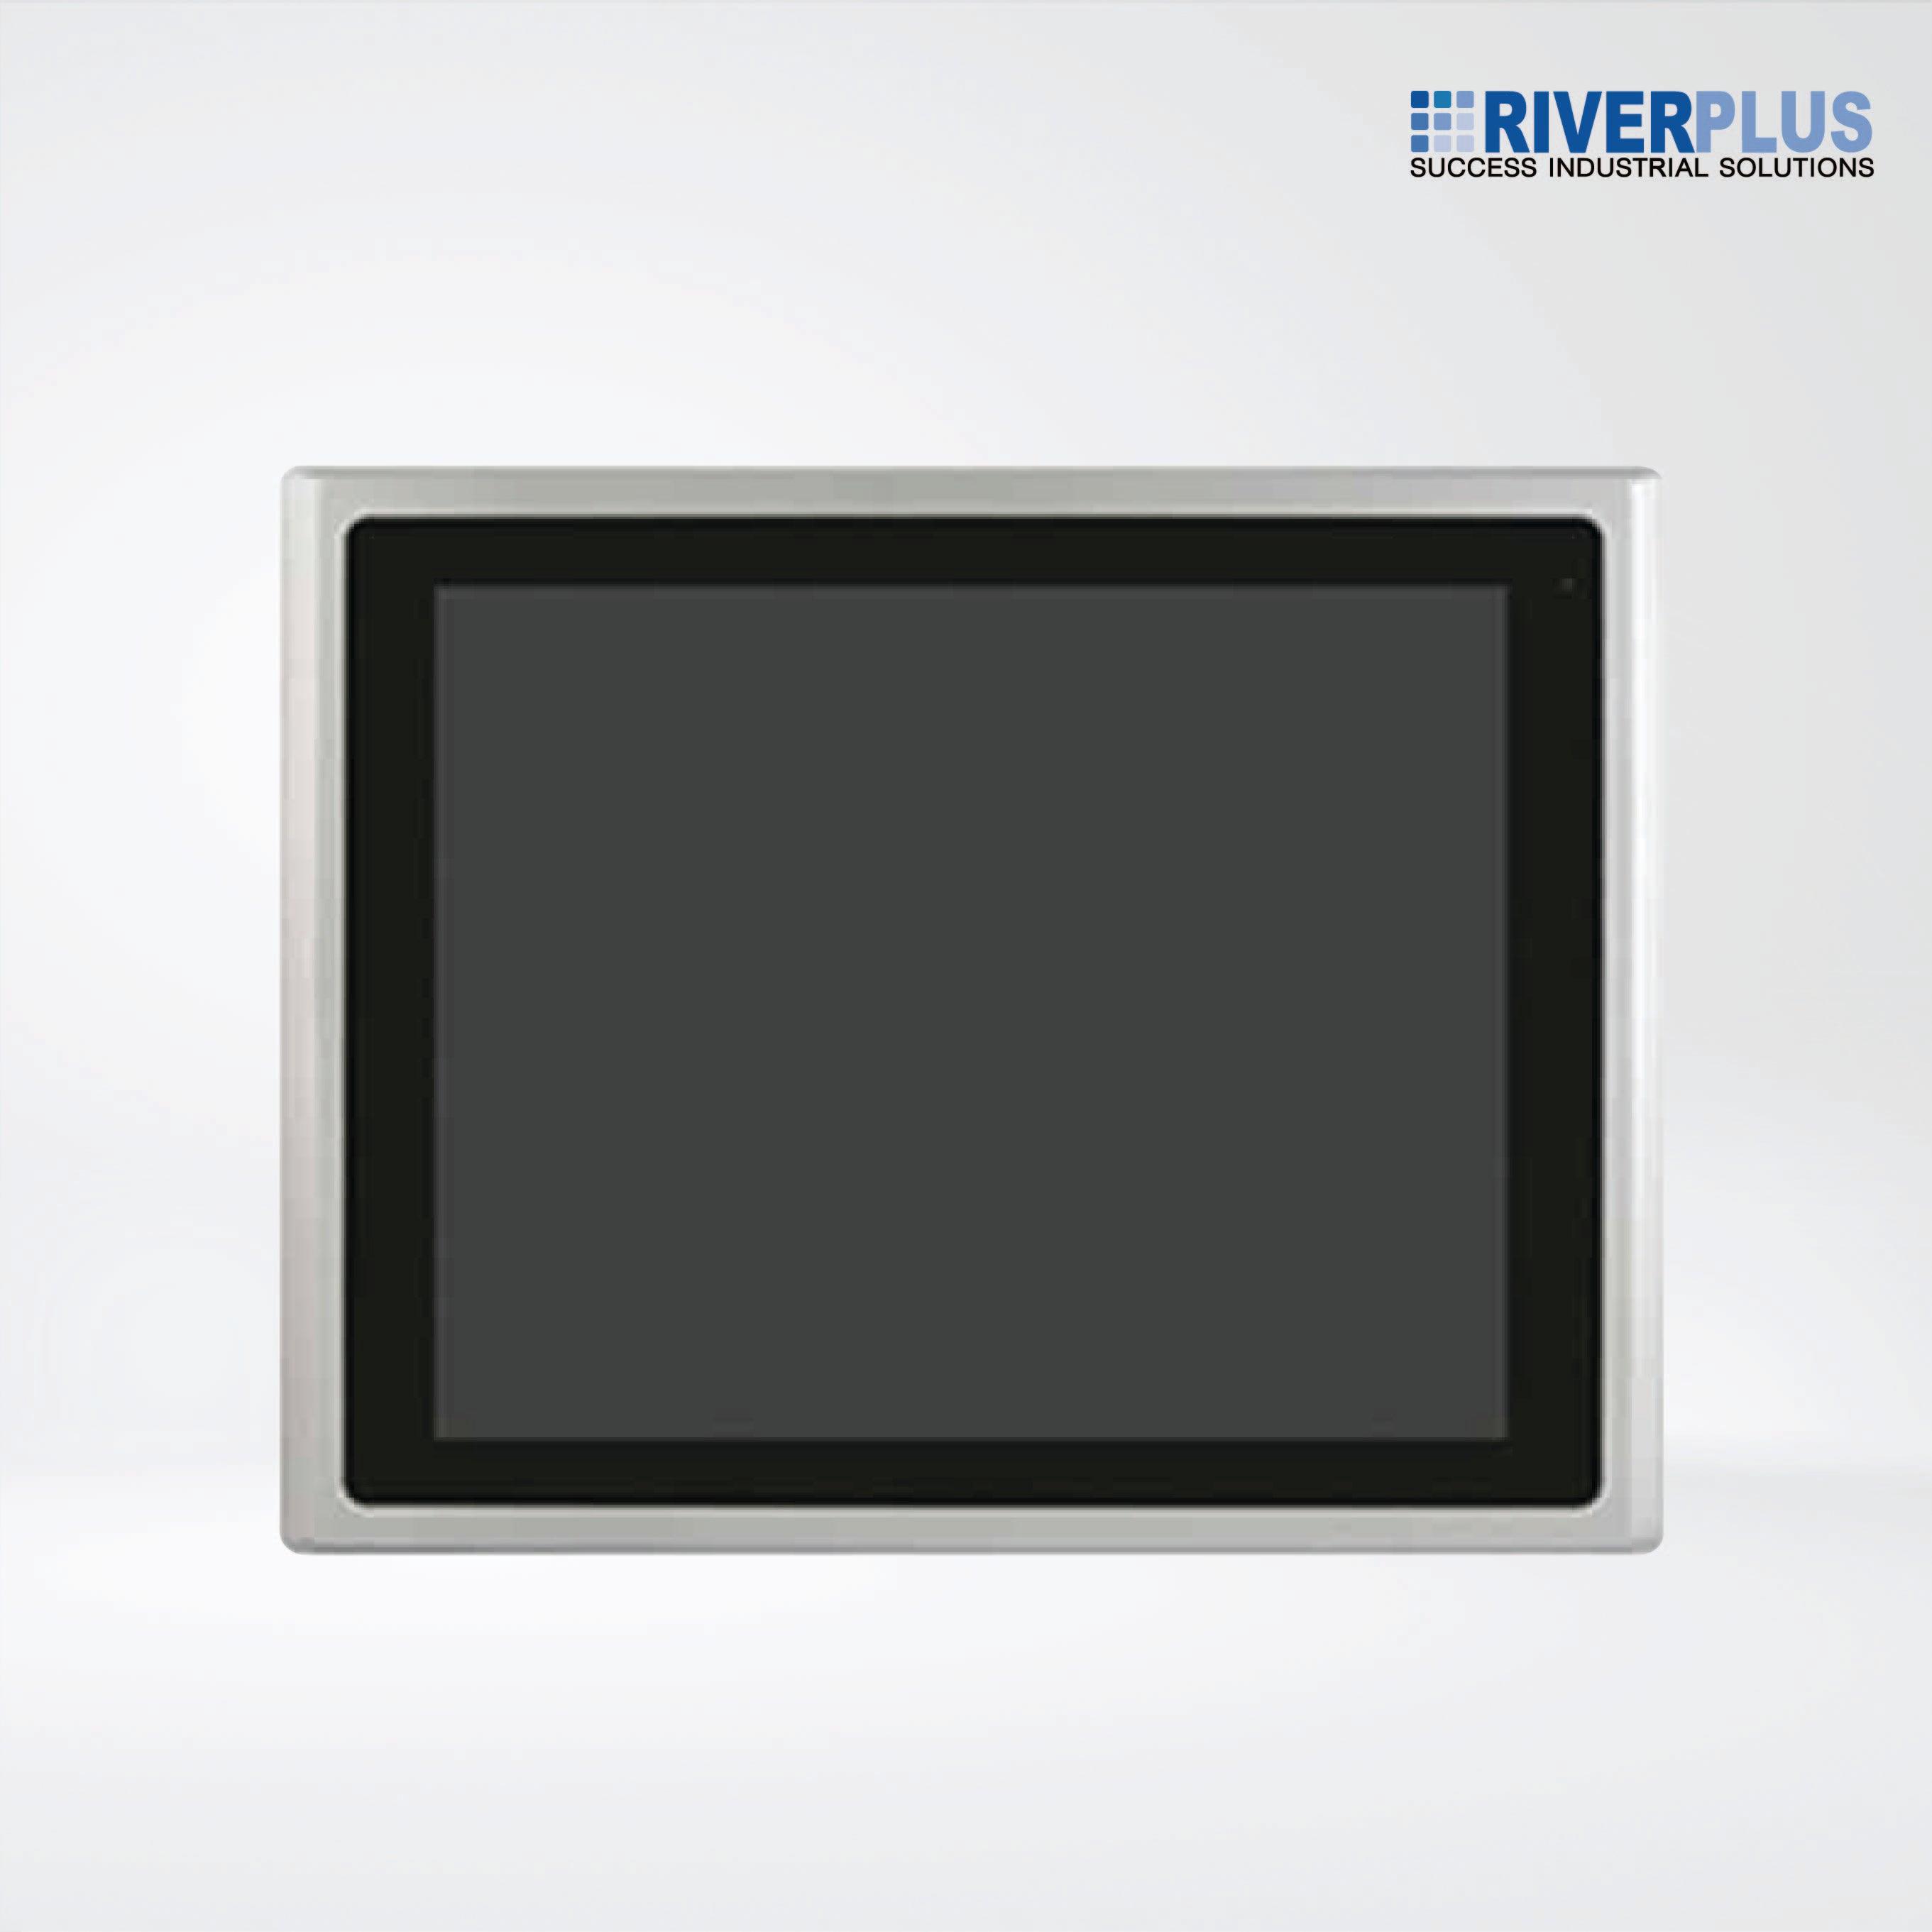 ARCHMI-815P New Generation Low Power Consumption HMI/Innovationg Fast, Bay Trail Solution - Riverplus